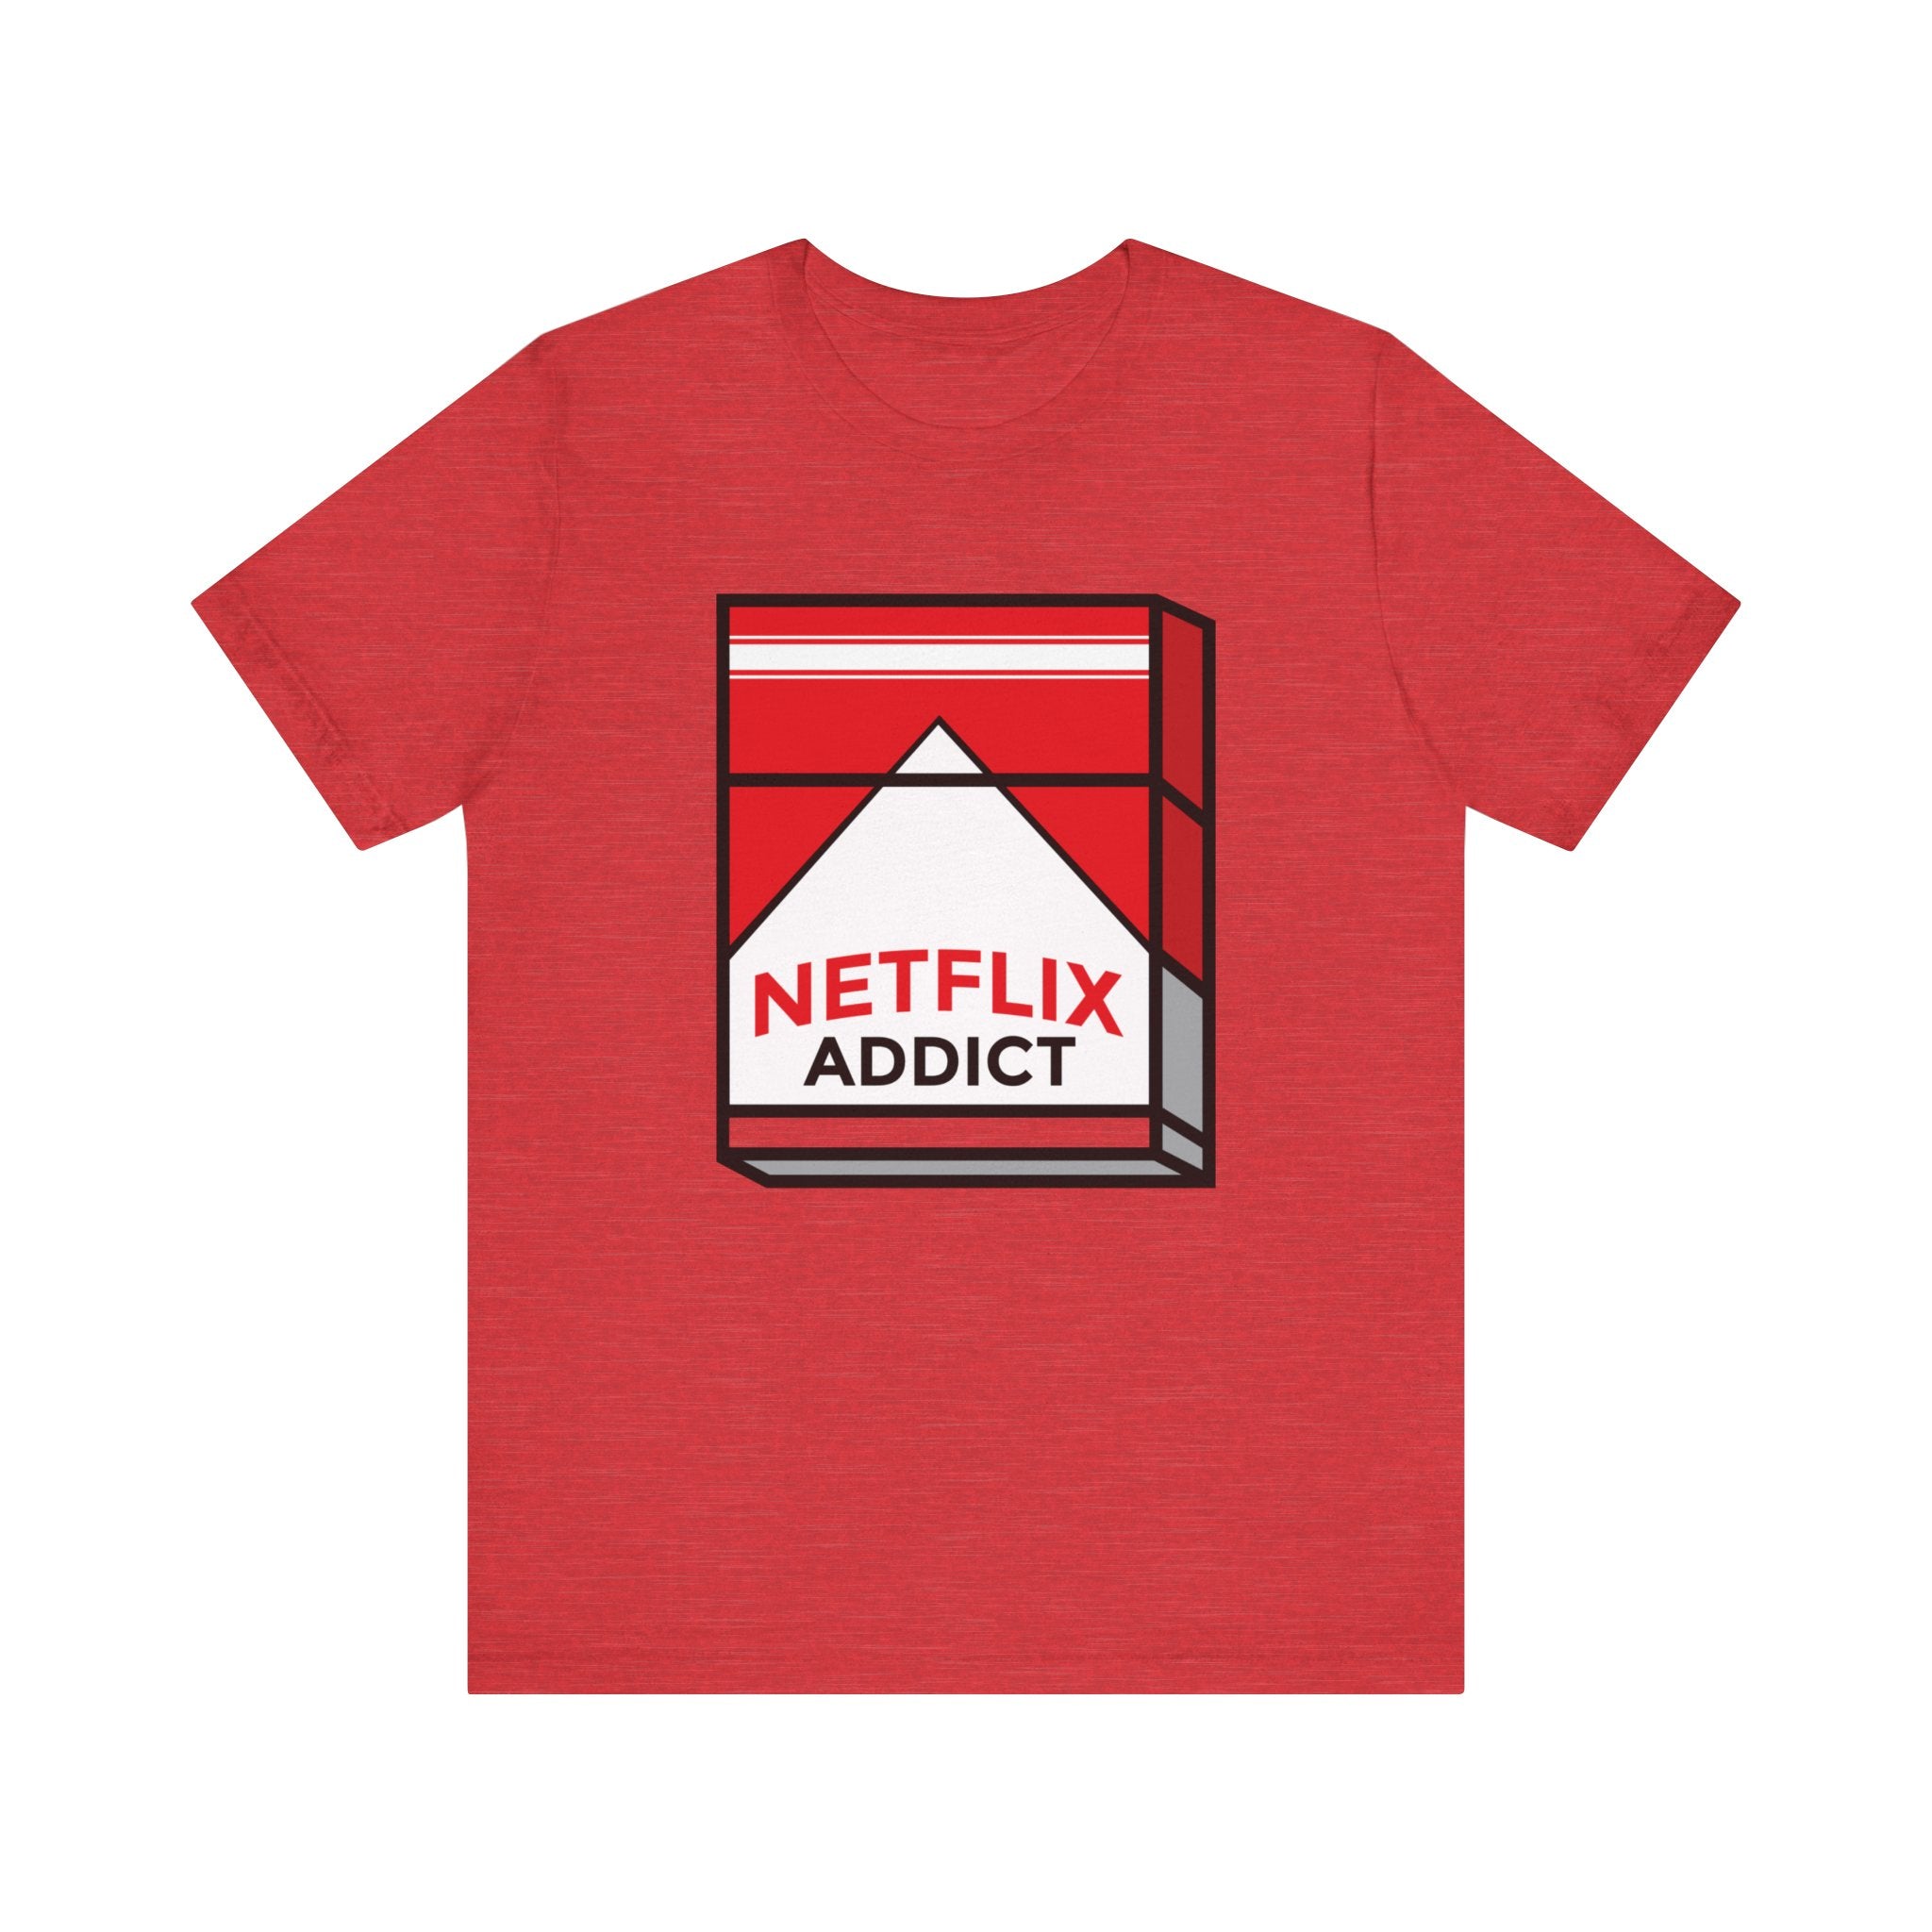 Unisex Netflix Addict tee with a graphic design resembling a battery icon, labeled "Netflix addiction" with white, red, and black colors.